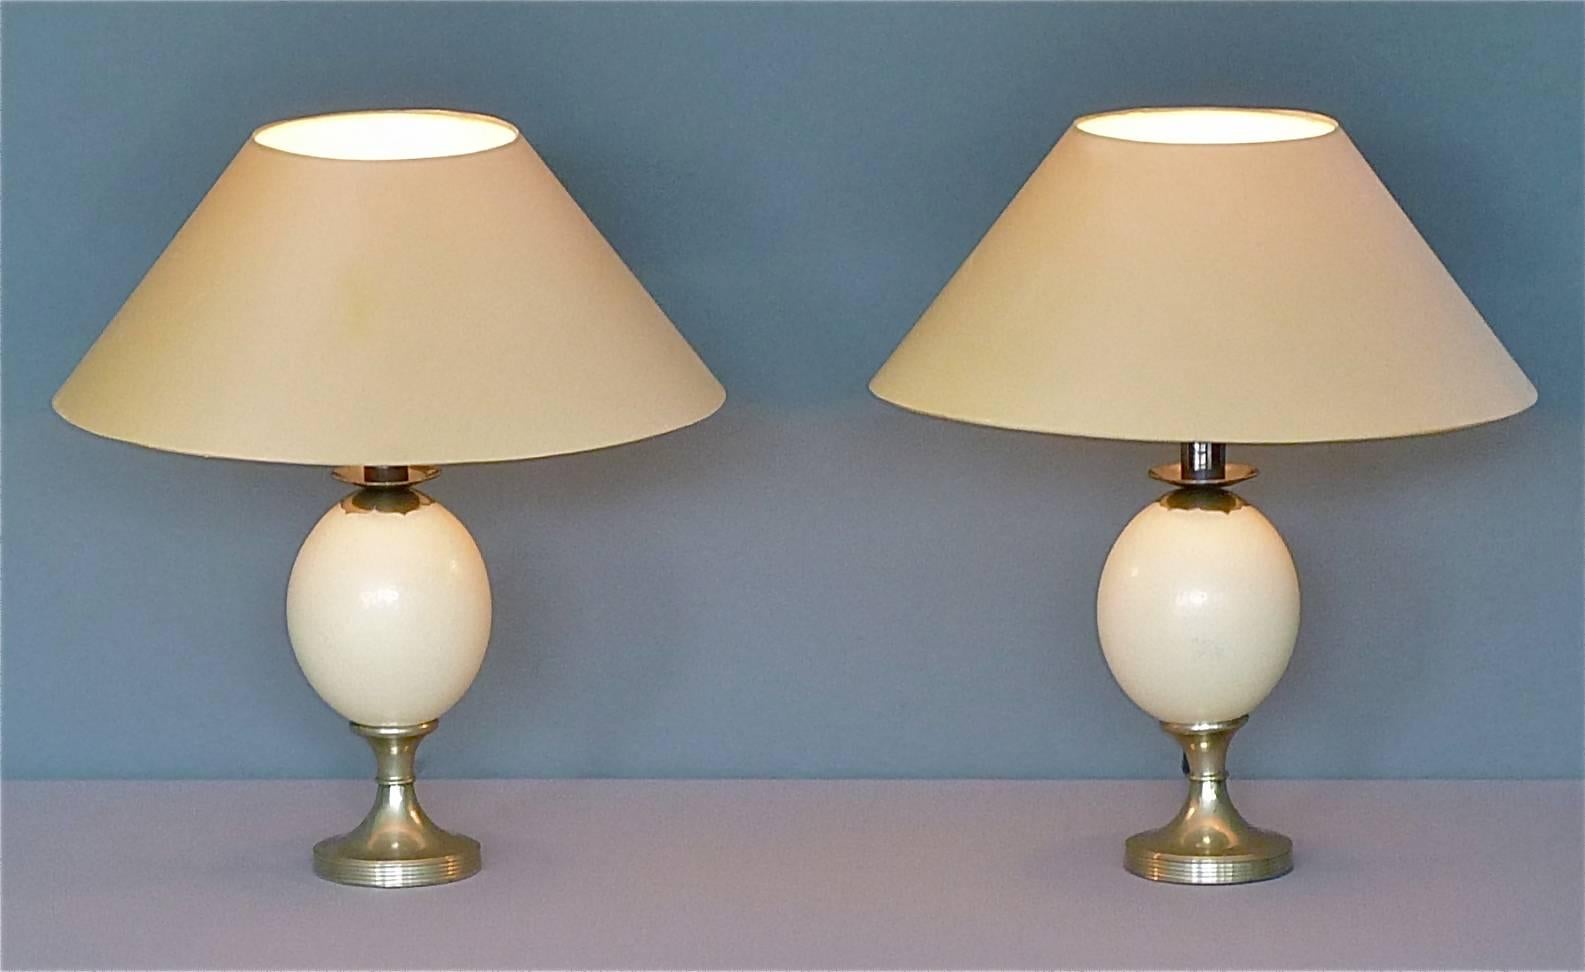 Pair beautiful silver plated ostrich egg table lamps signed by Anthony Redmile, England circa 1970s. The wiring, switch and plug are perfect so the table lamps are in fine working condition and ready to use. Both table lamps stay in a very good